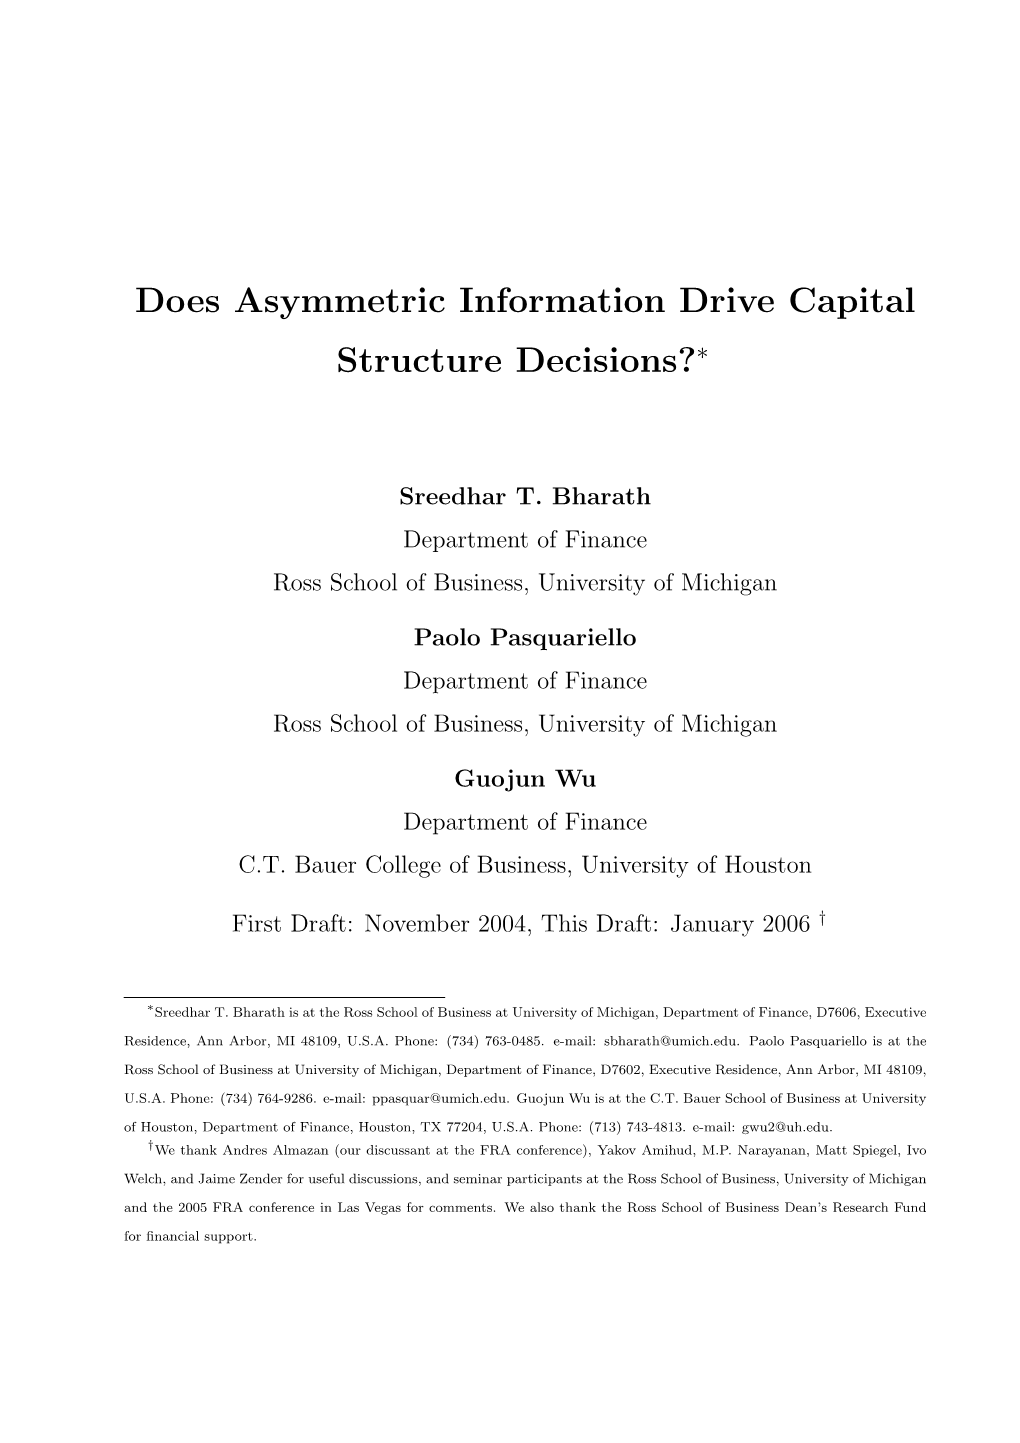 Does Asymmetric Information Drive Capital Structure Decisions?∗